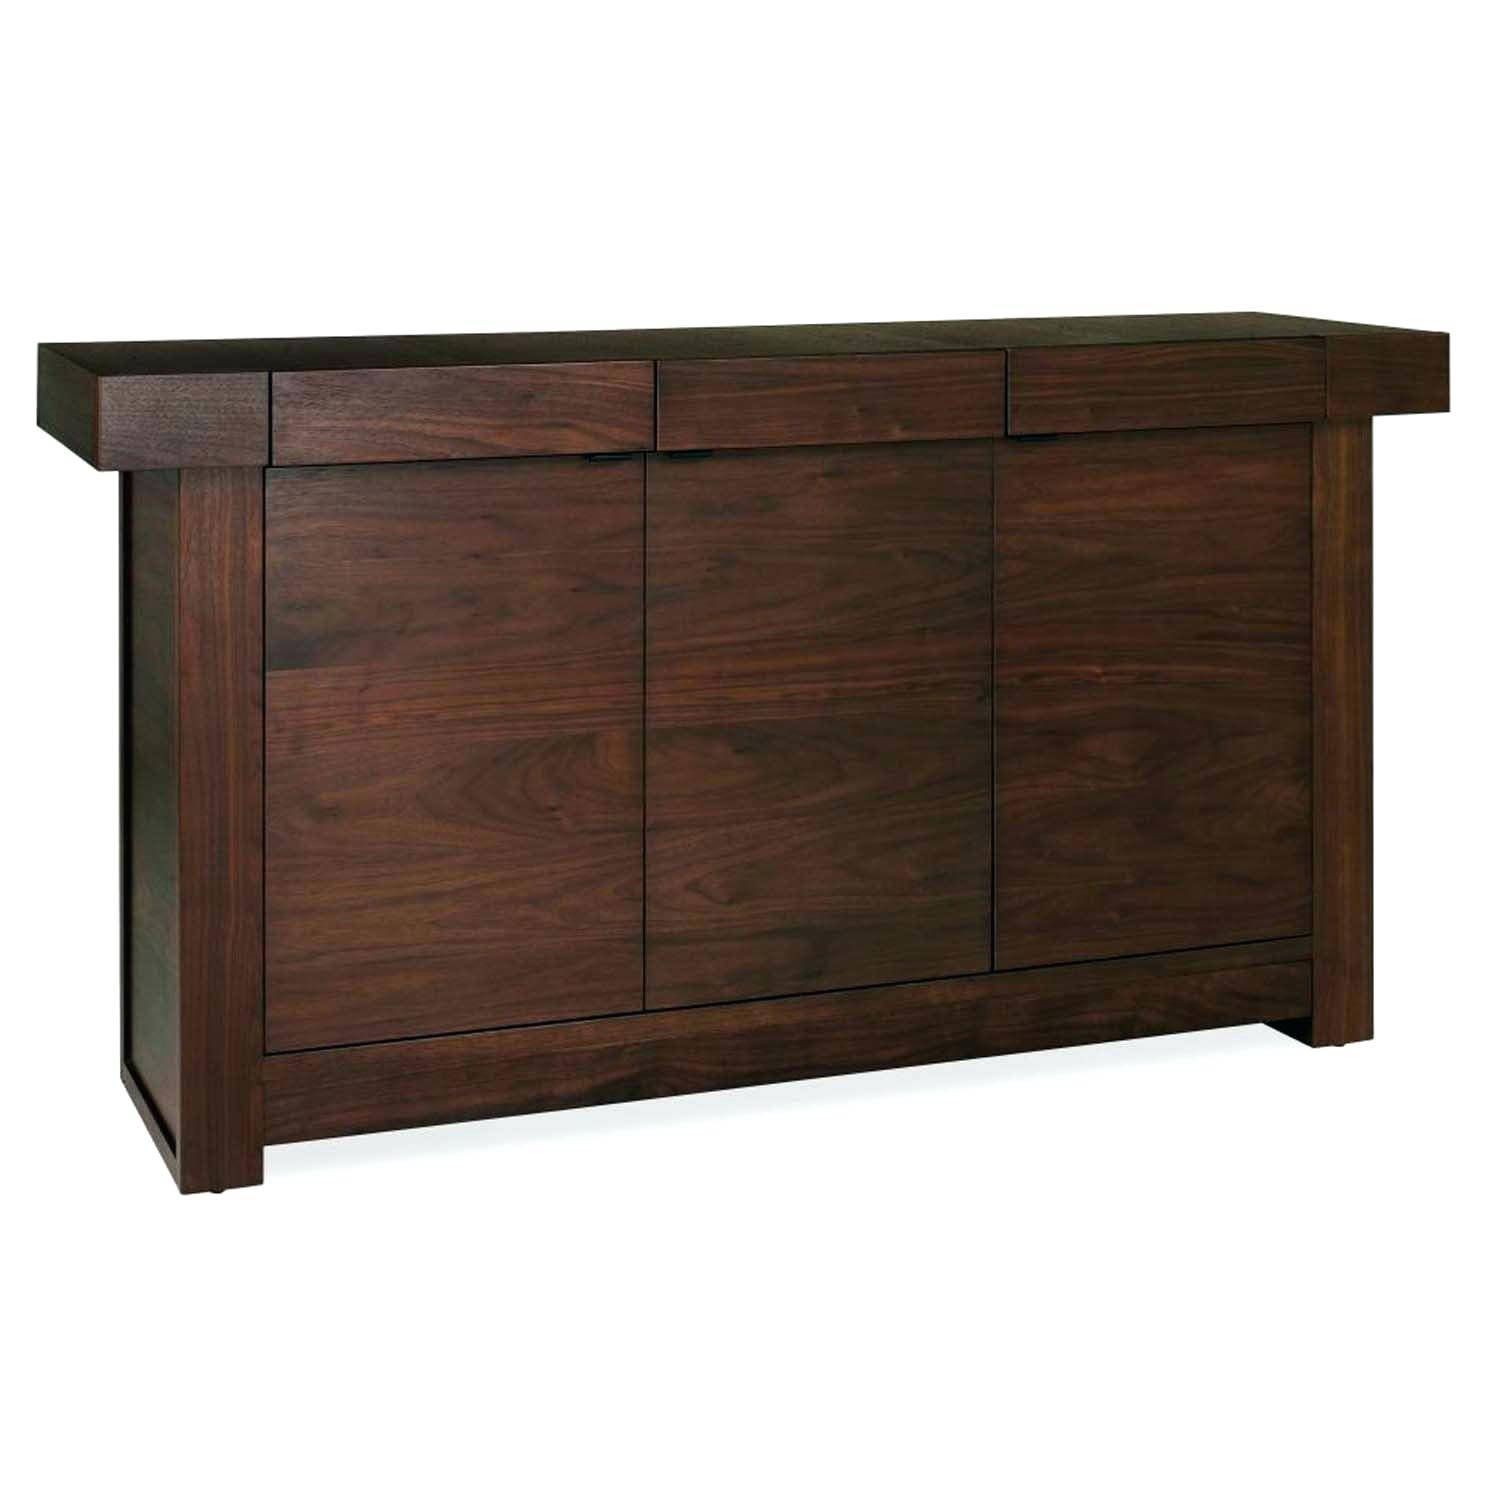 Walnut Sideboards Walnut Sideboard Sideboards Walnut Effect Pertaining To Most Recent Walnut Sideboards (Photo 10 of 15)